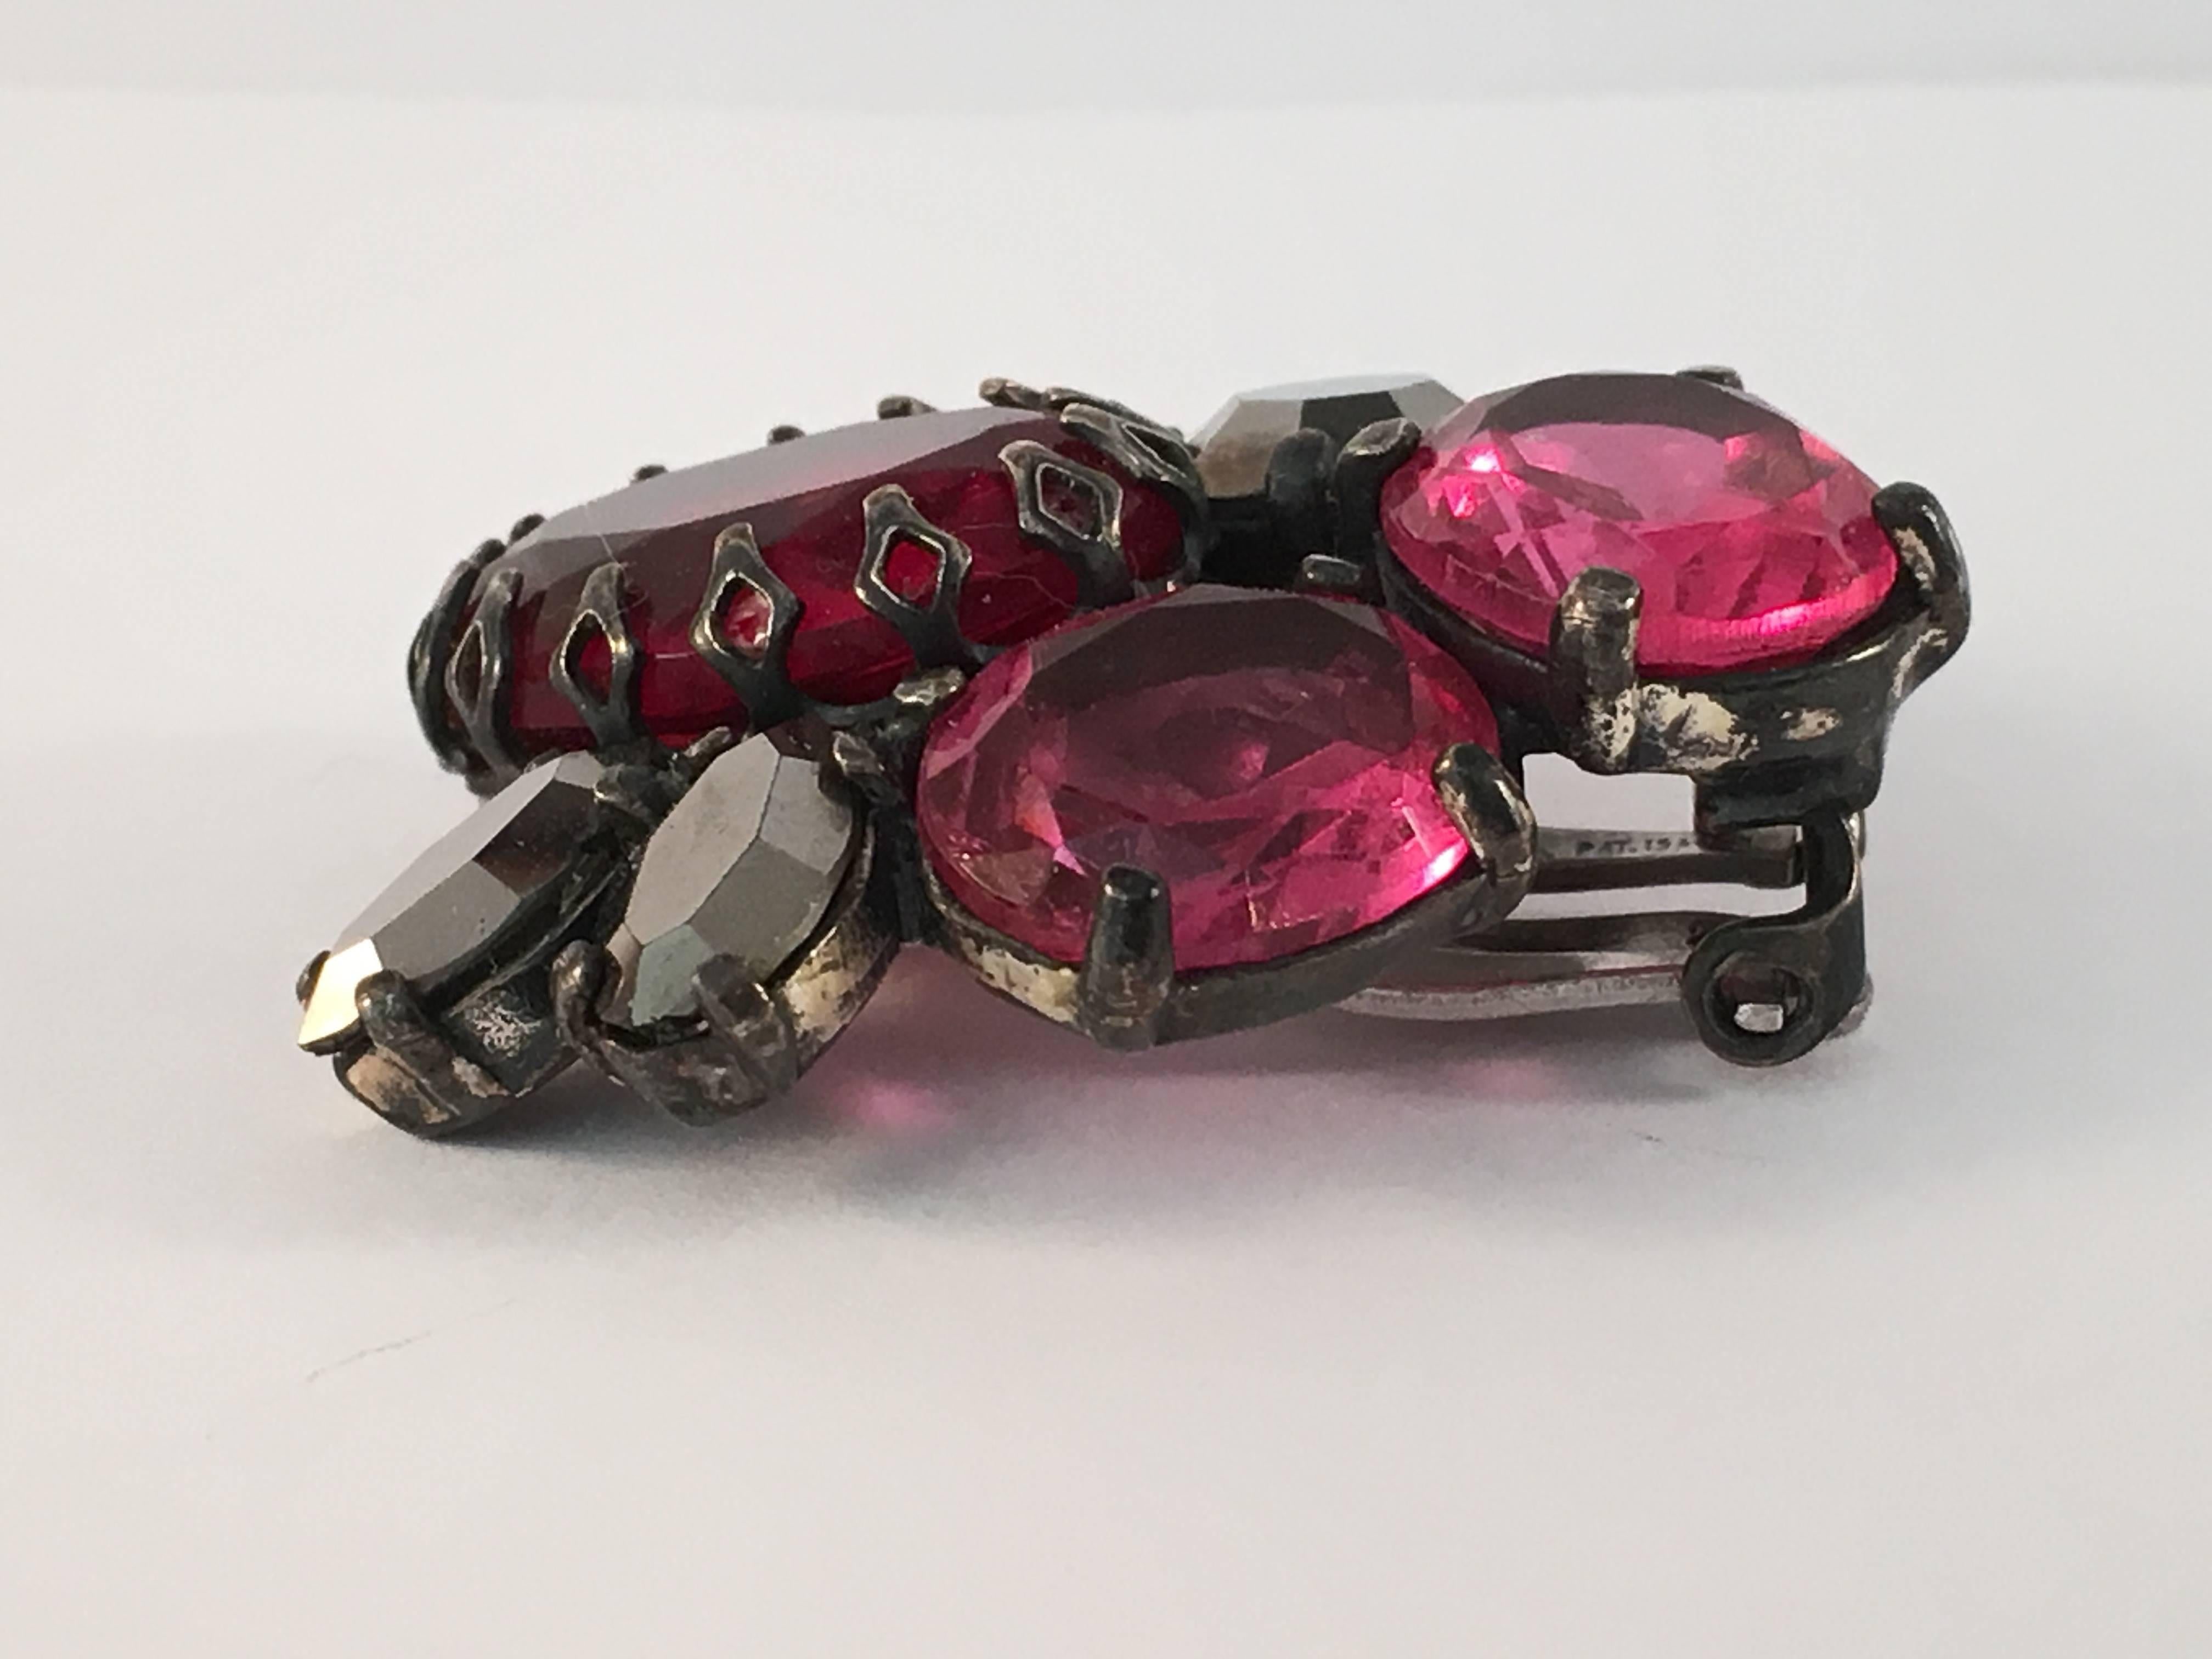 Iconic 1950s Schiaparelli pink clip-on earrings. These earrings measure 1 3/8" long x 1 1/4" wide and have prong set pink, red and gun-metal colored glass stones. Both earrings are signed, 'Schiaparelli' on the back of the clips. The clips